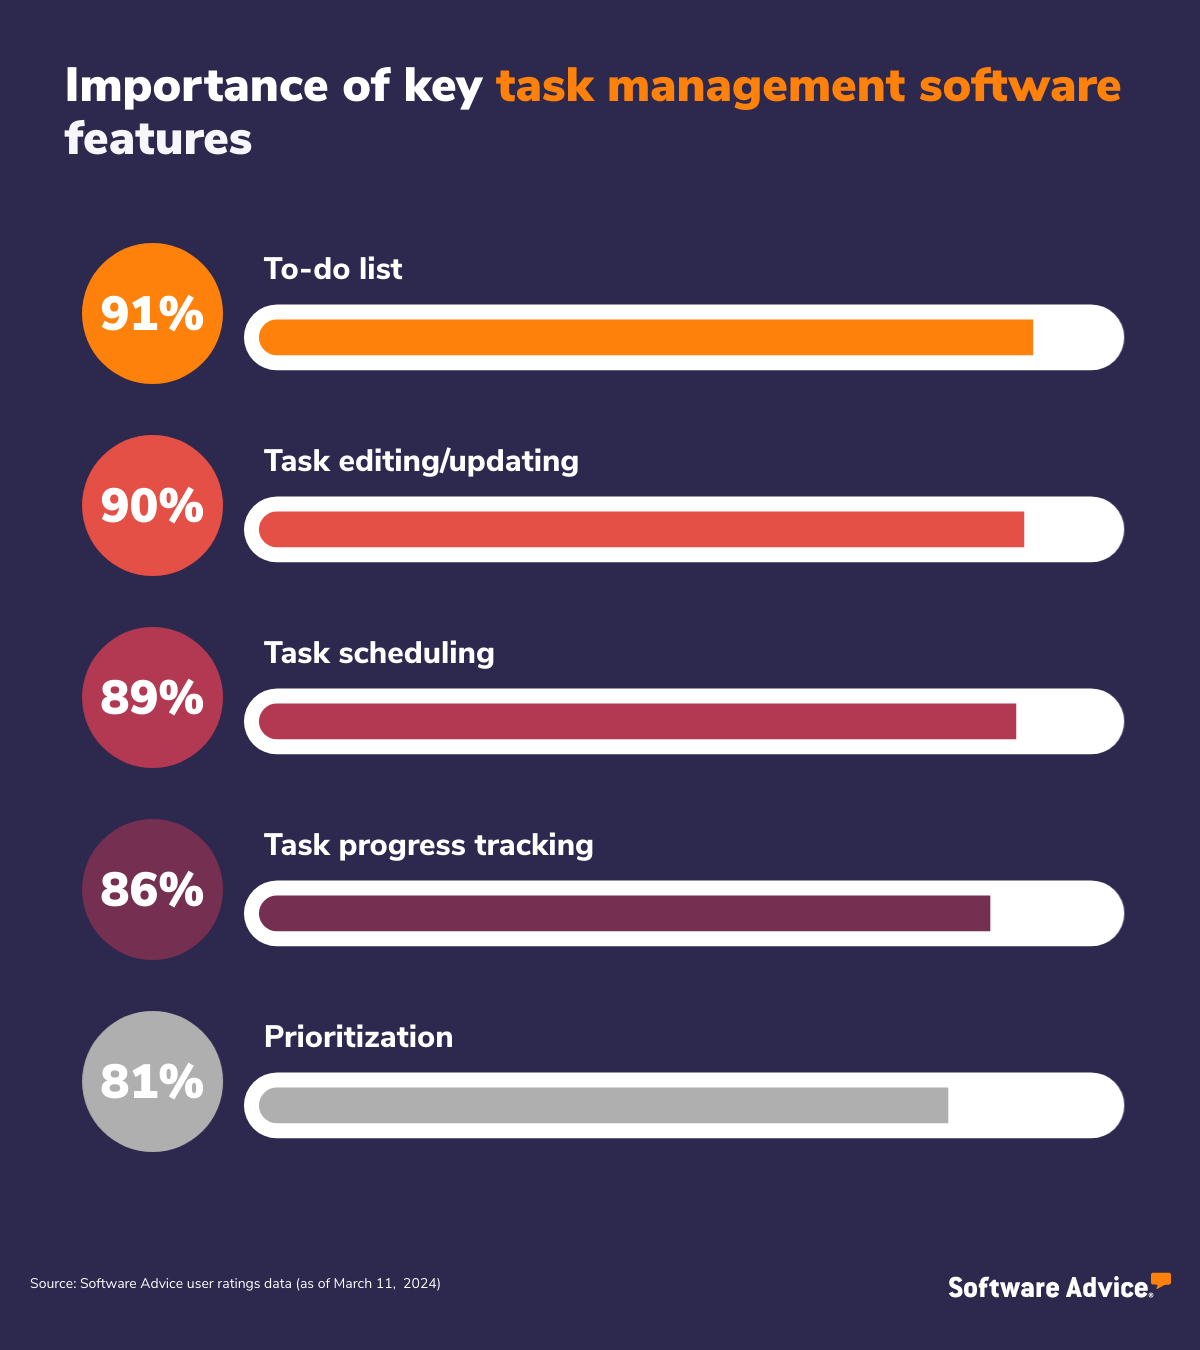 Graphic showing the importance of five key features of task management software. 91% to-do list; 90% task editing/updating; 89% task scheduling; 86% task progress tracking; and 81% prioritization.